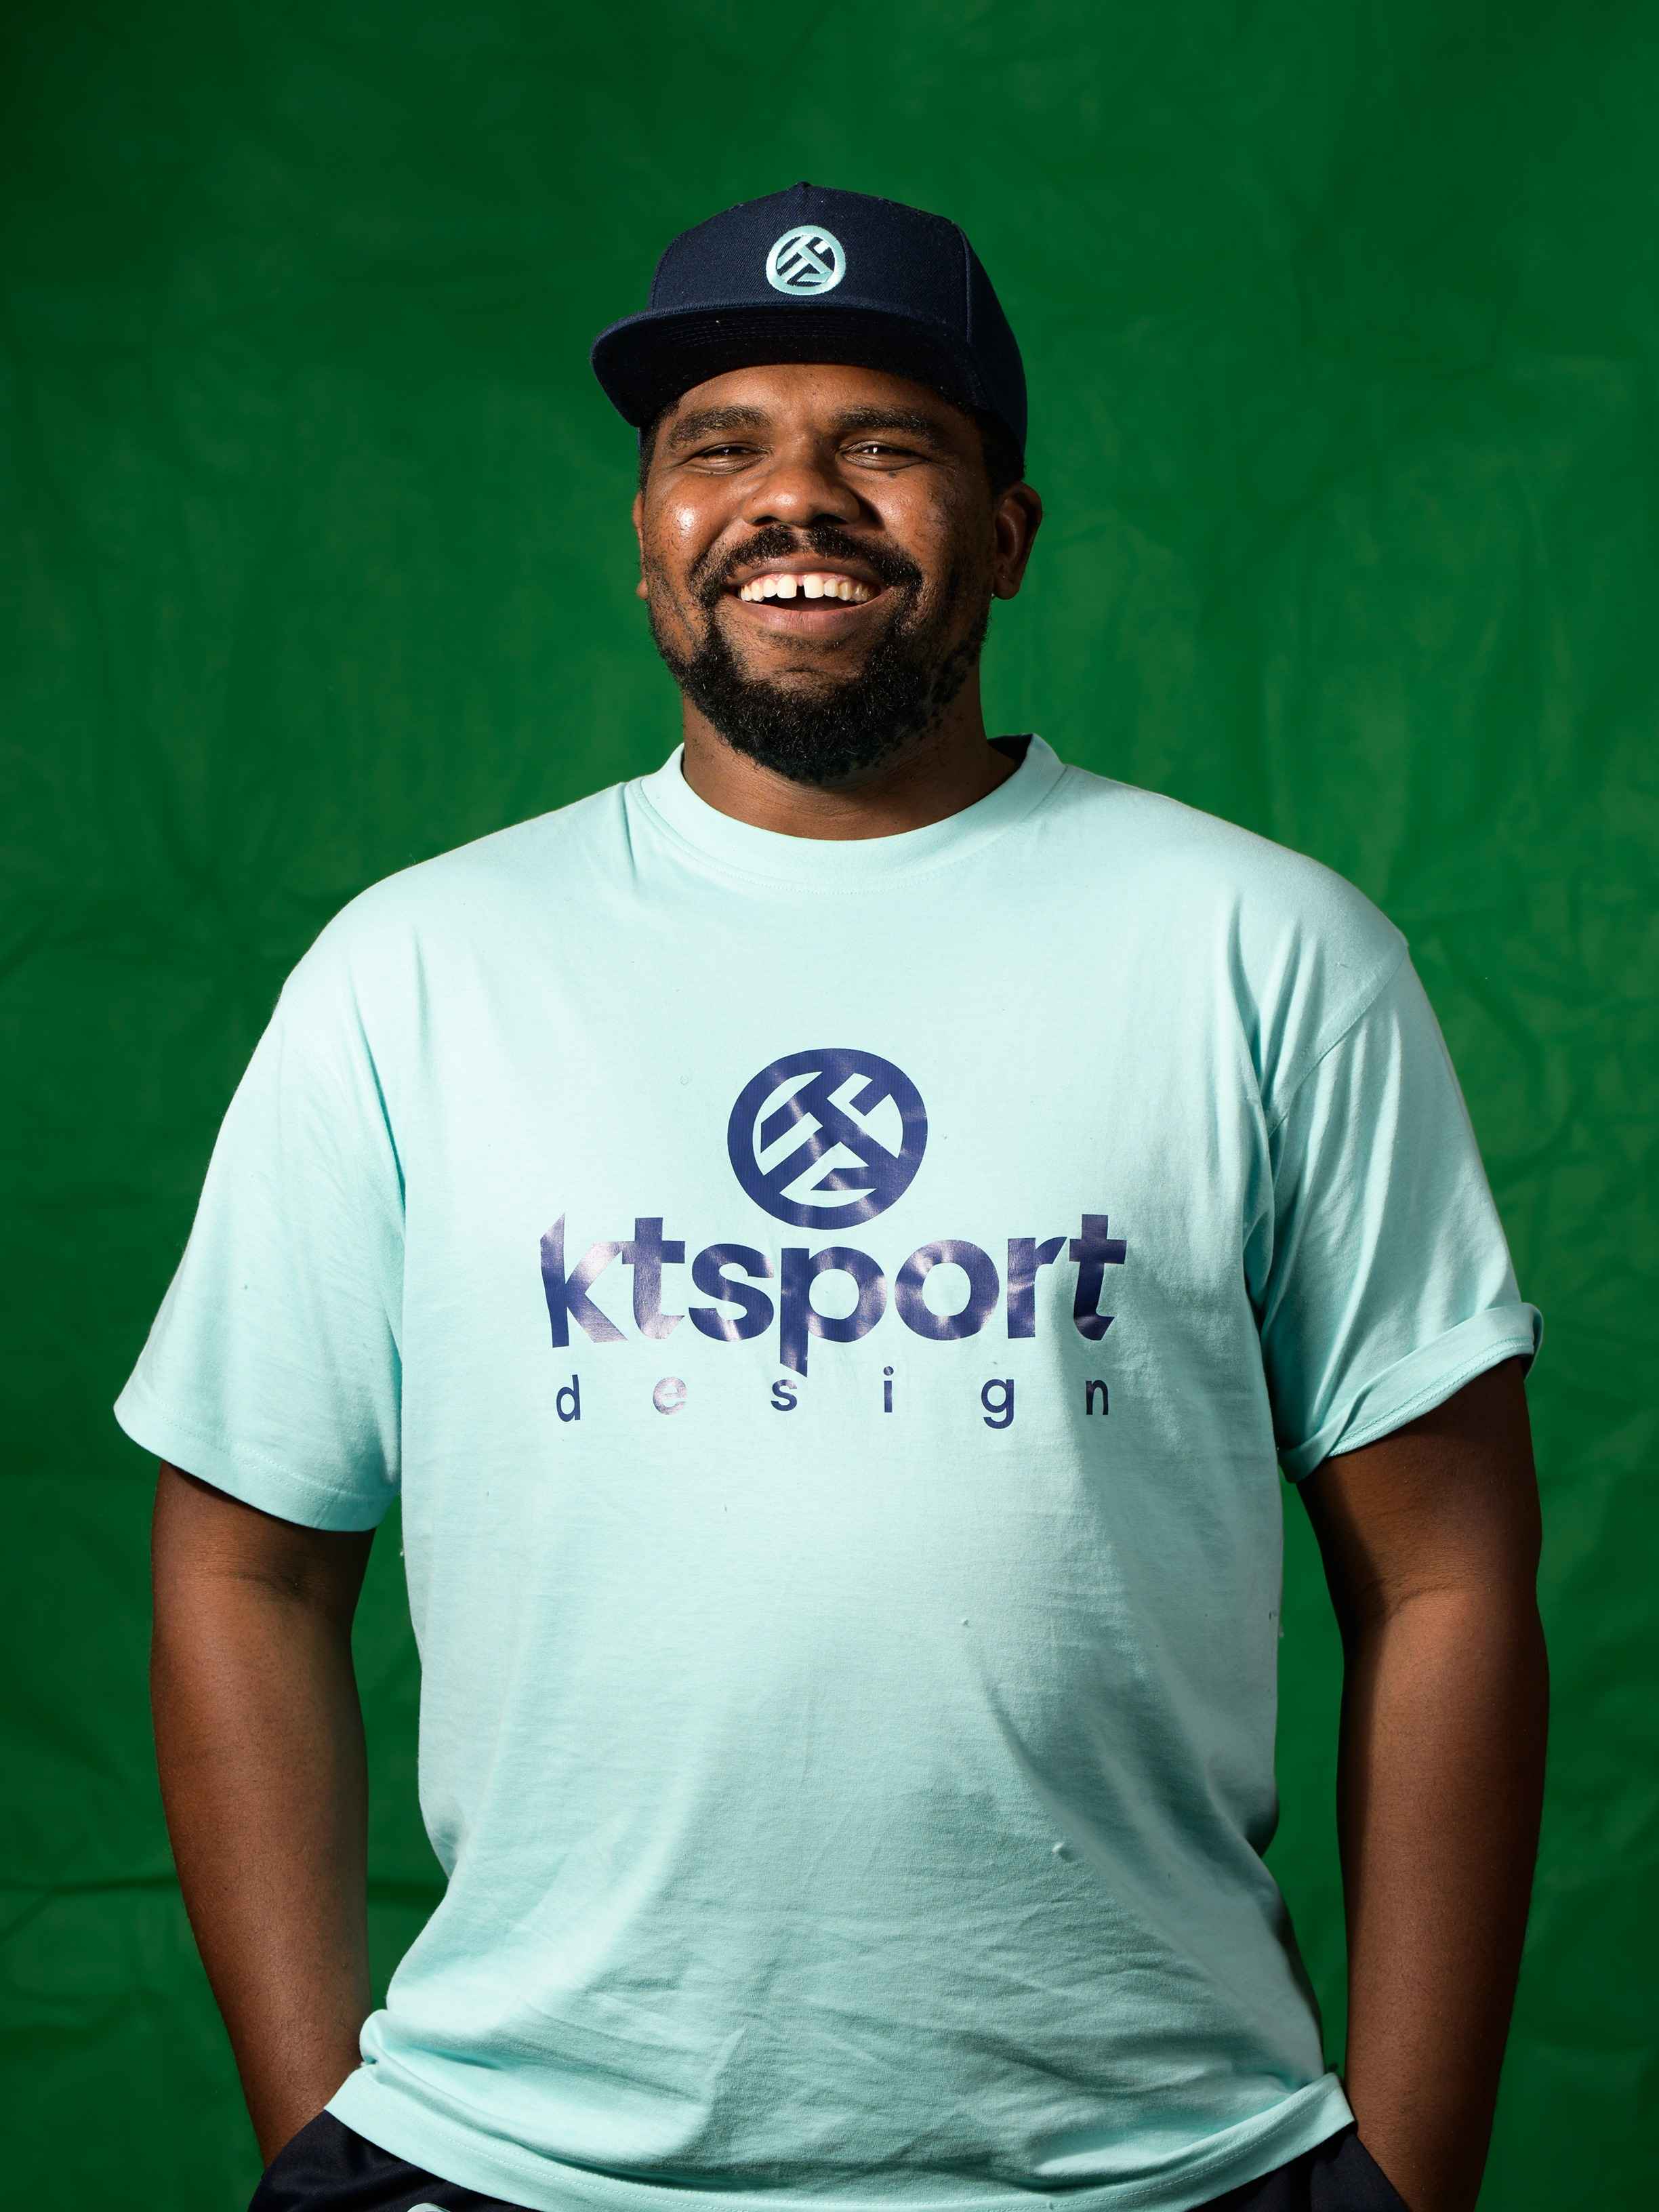 Kevin Tresor and his new agency KT Sport Design